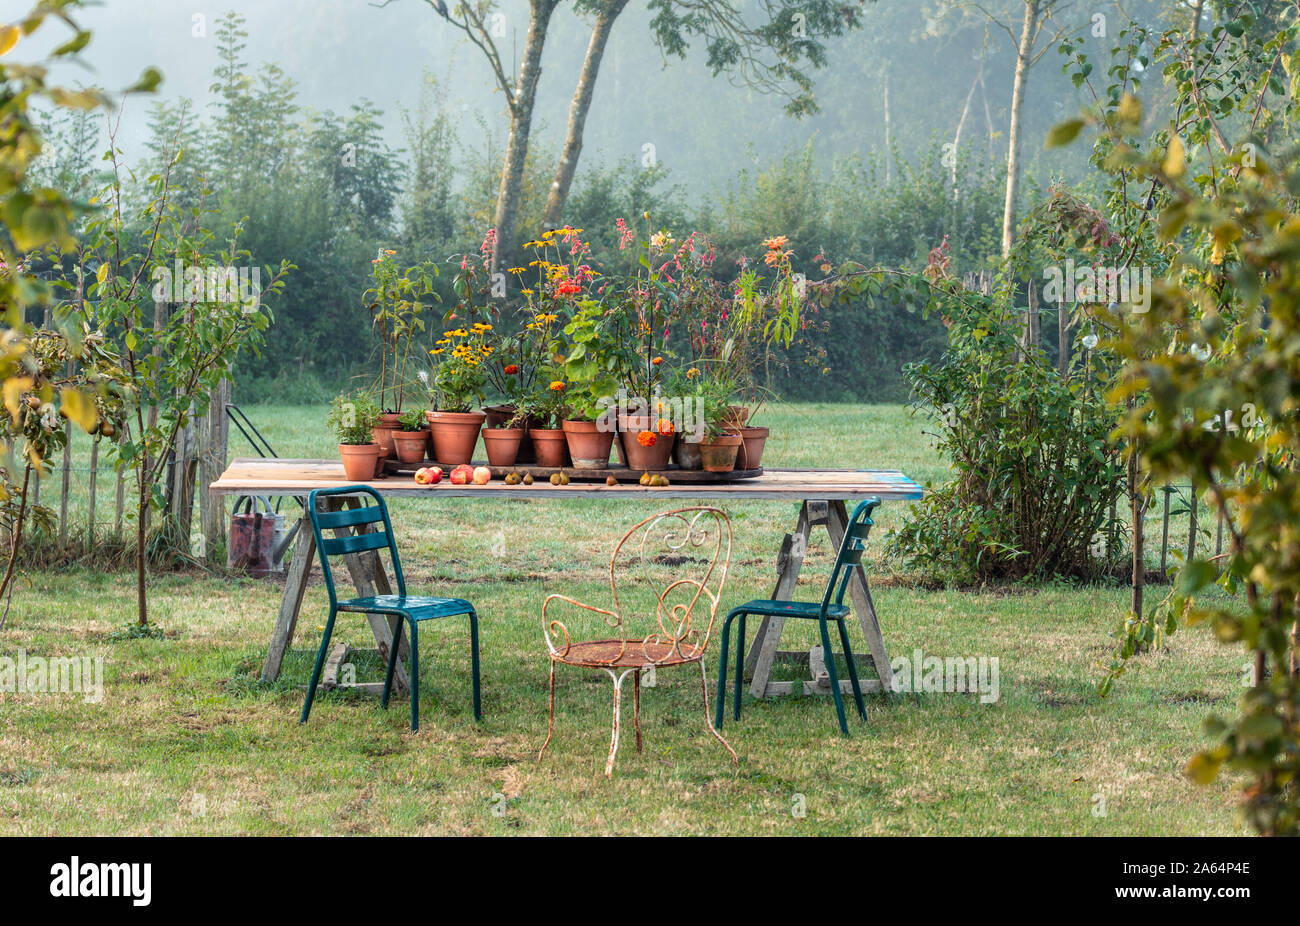 Table in orchard with flowering plants in pots Stock Photo